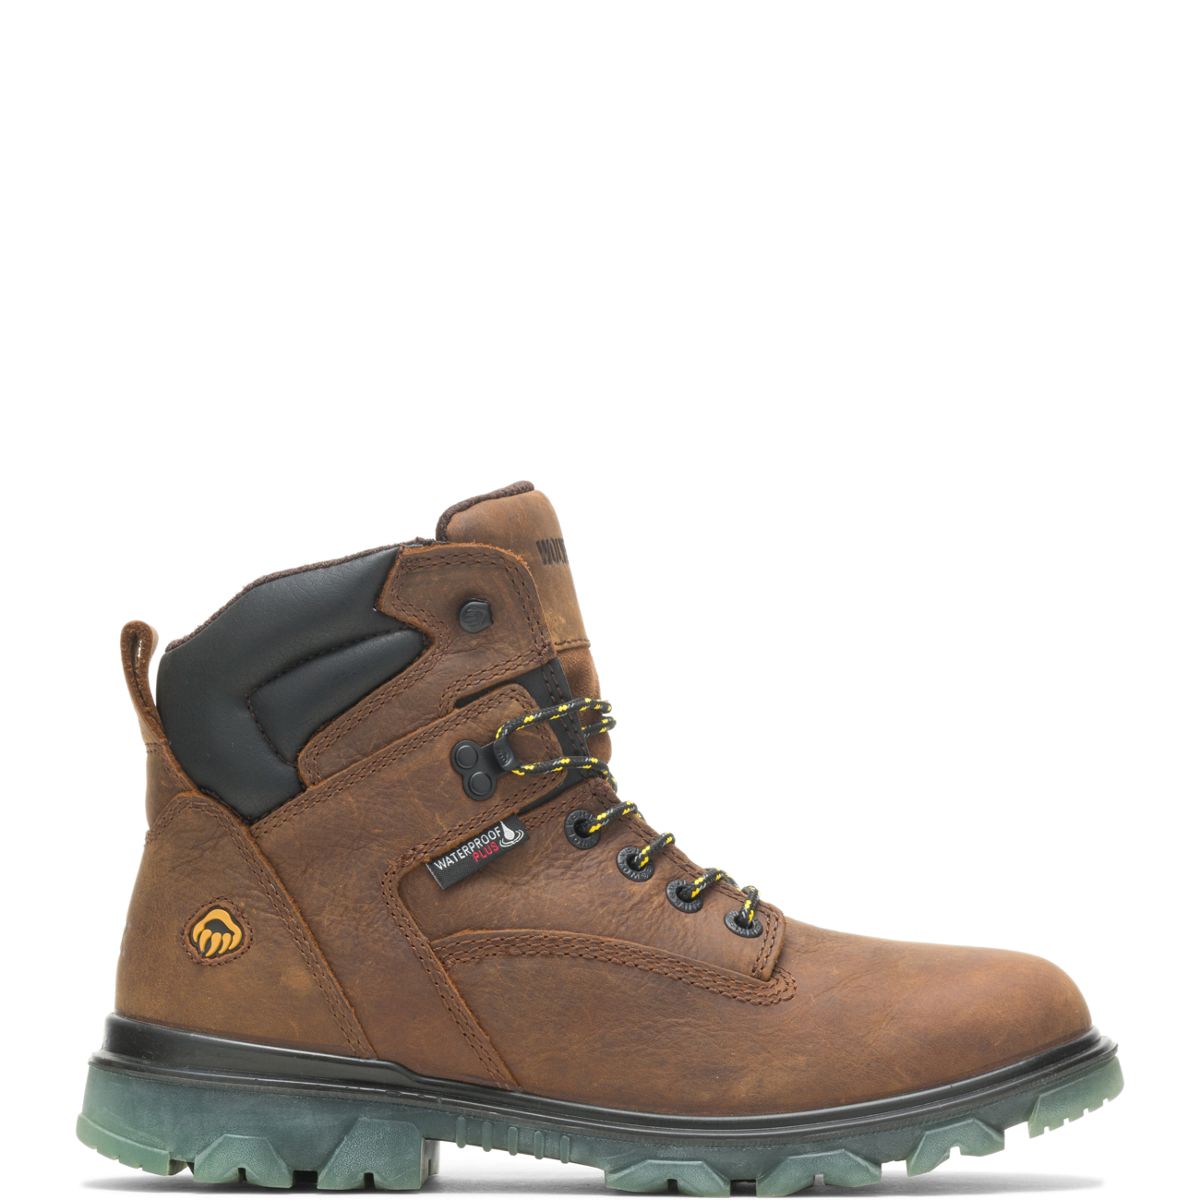 I-90 EPX® CarbonMAX® Boot, Brown, dynamic